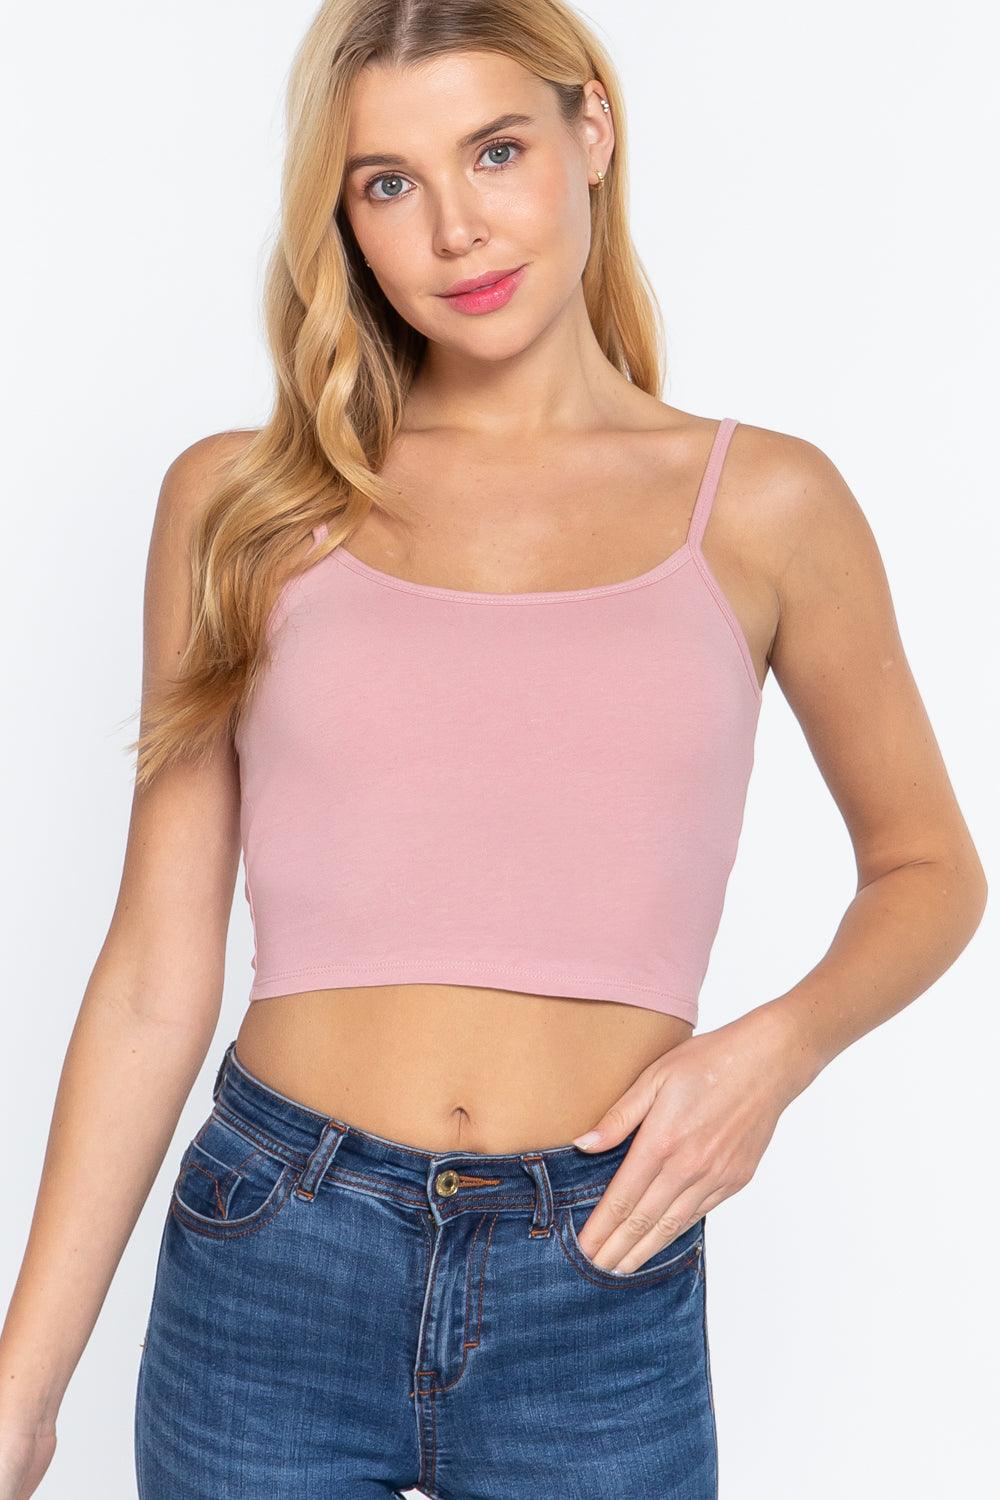 Round Neck W/removable Bra Cup Cotton Spandex Bra Top - Kreative Passions